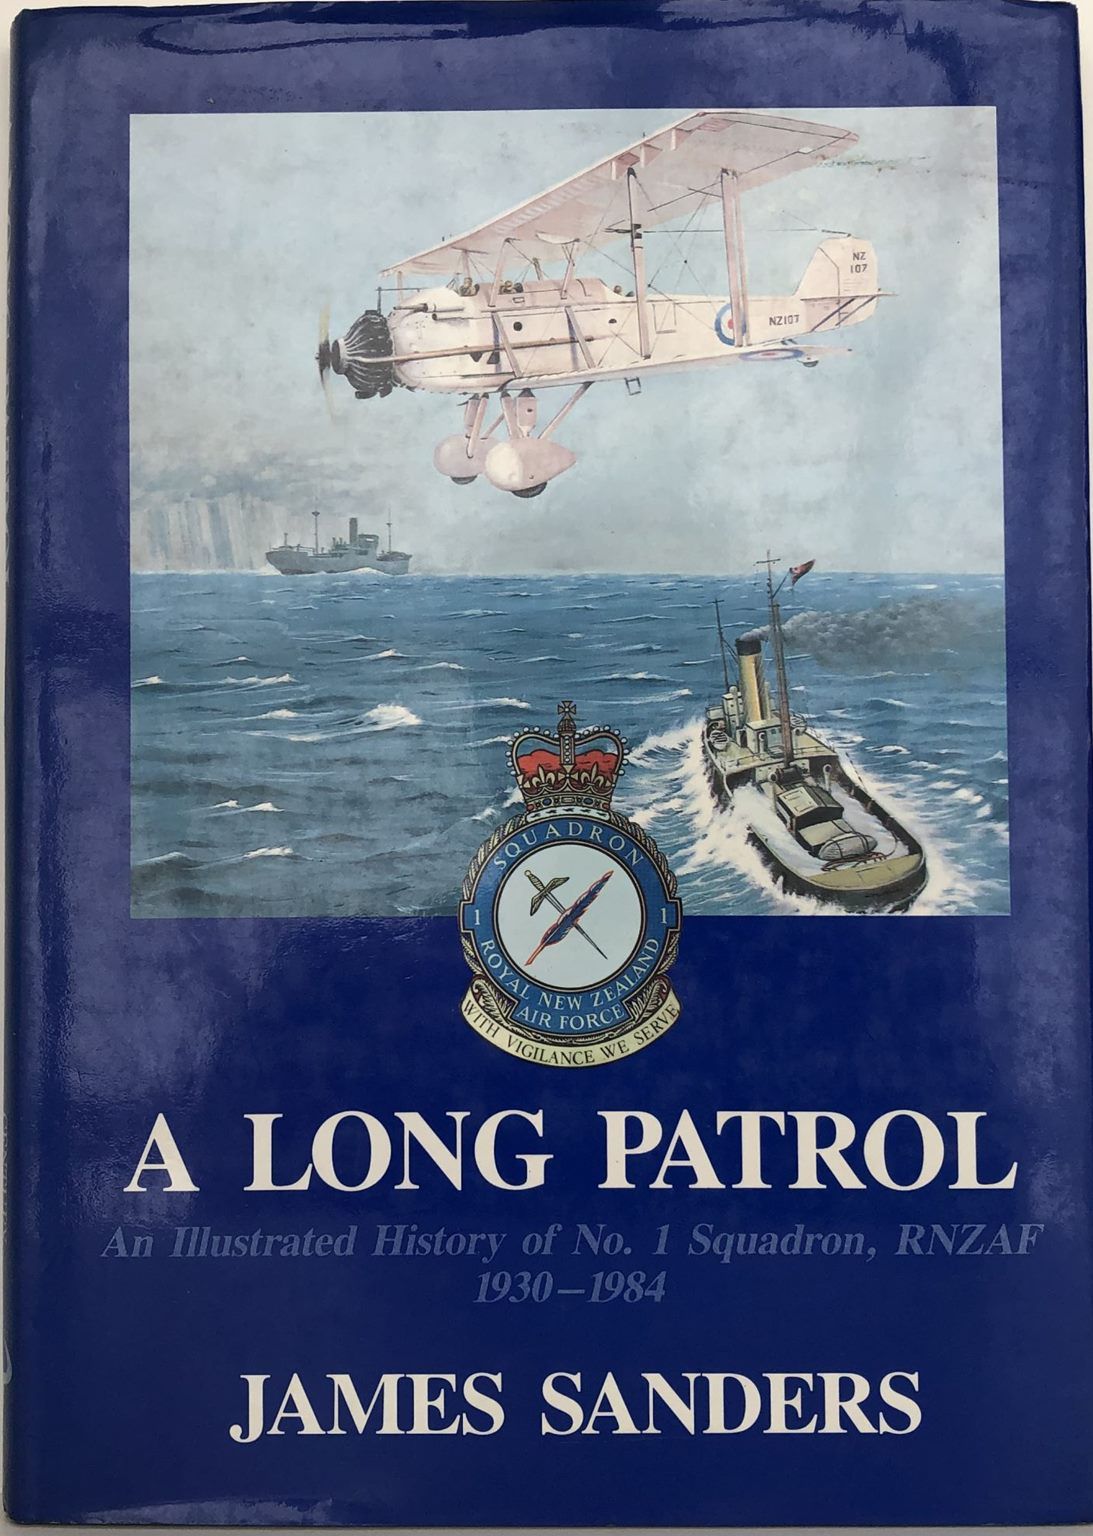 A LONG PATROL: An Illustrated History of No.1 Squadron RNZAF 1930-1984